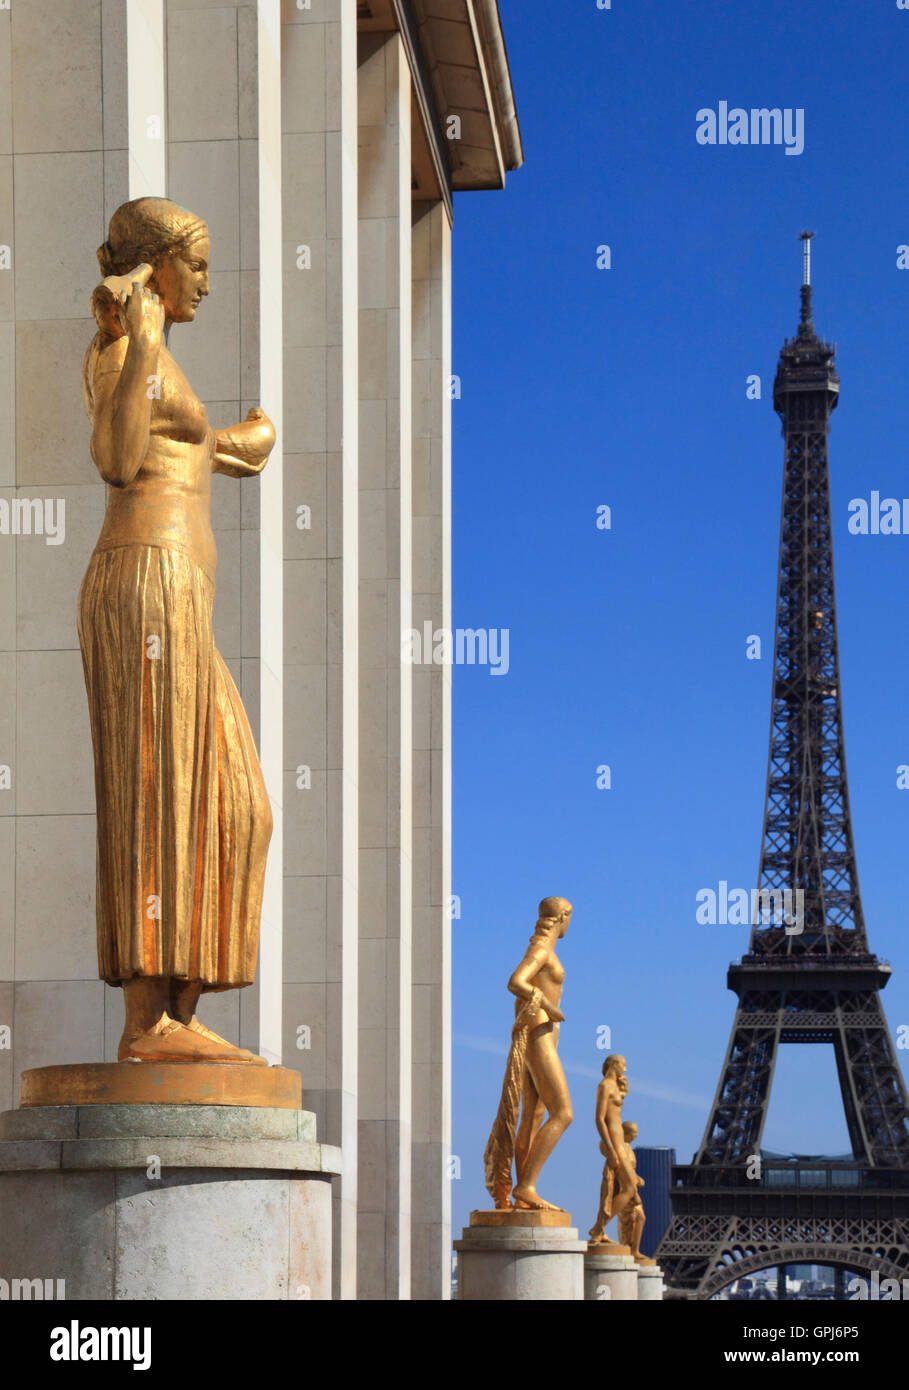 The Gold Statues of Palais de Chaillot with the Eiffel Tower in the background, Trocadero, Paris, France, Europe Stock Photo